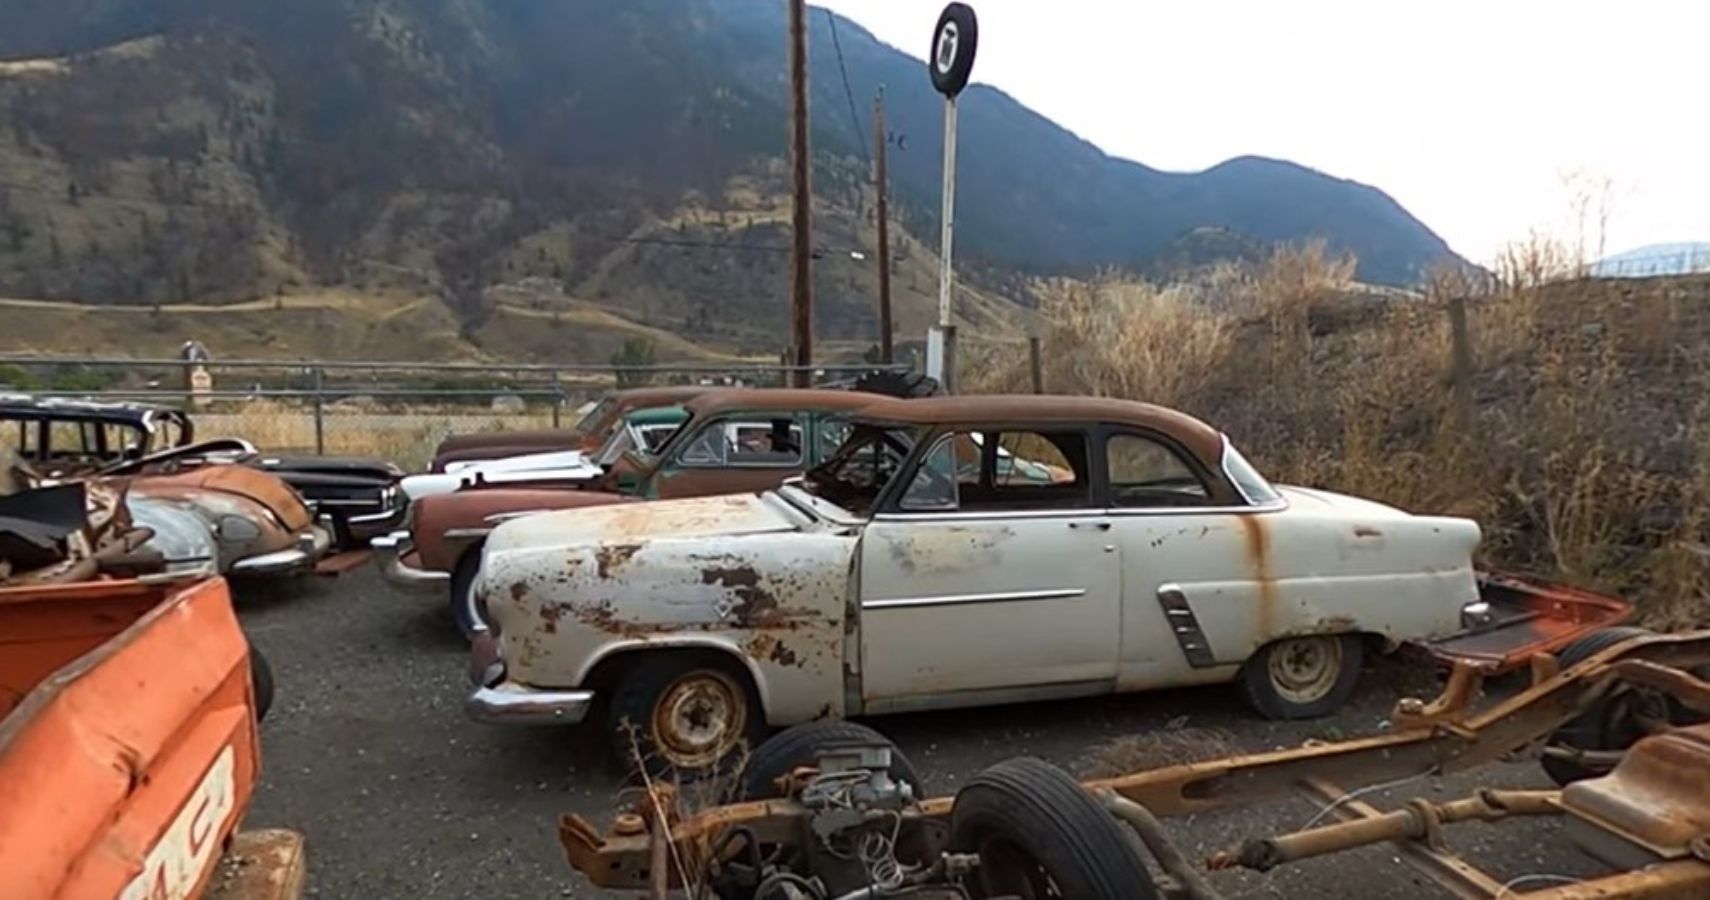 Check Out This Collection Of Abandoned Classic Cars With A Serious Potential For A Second Life